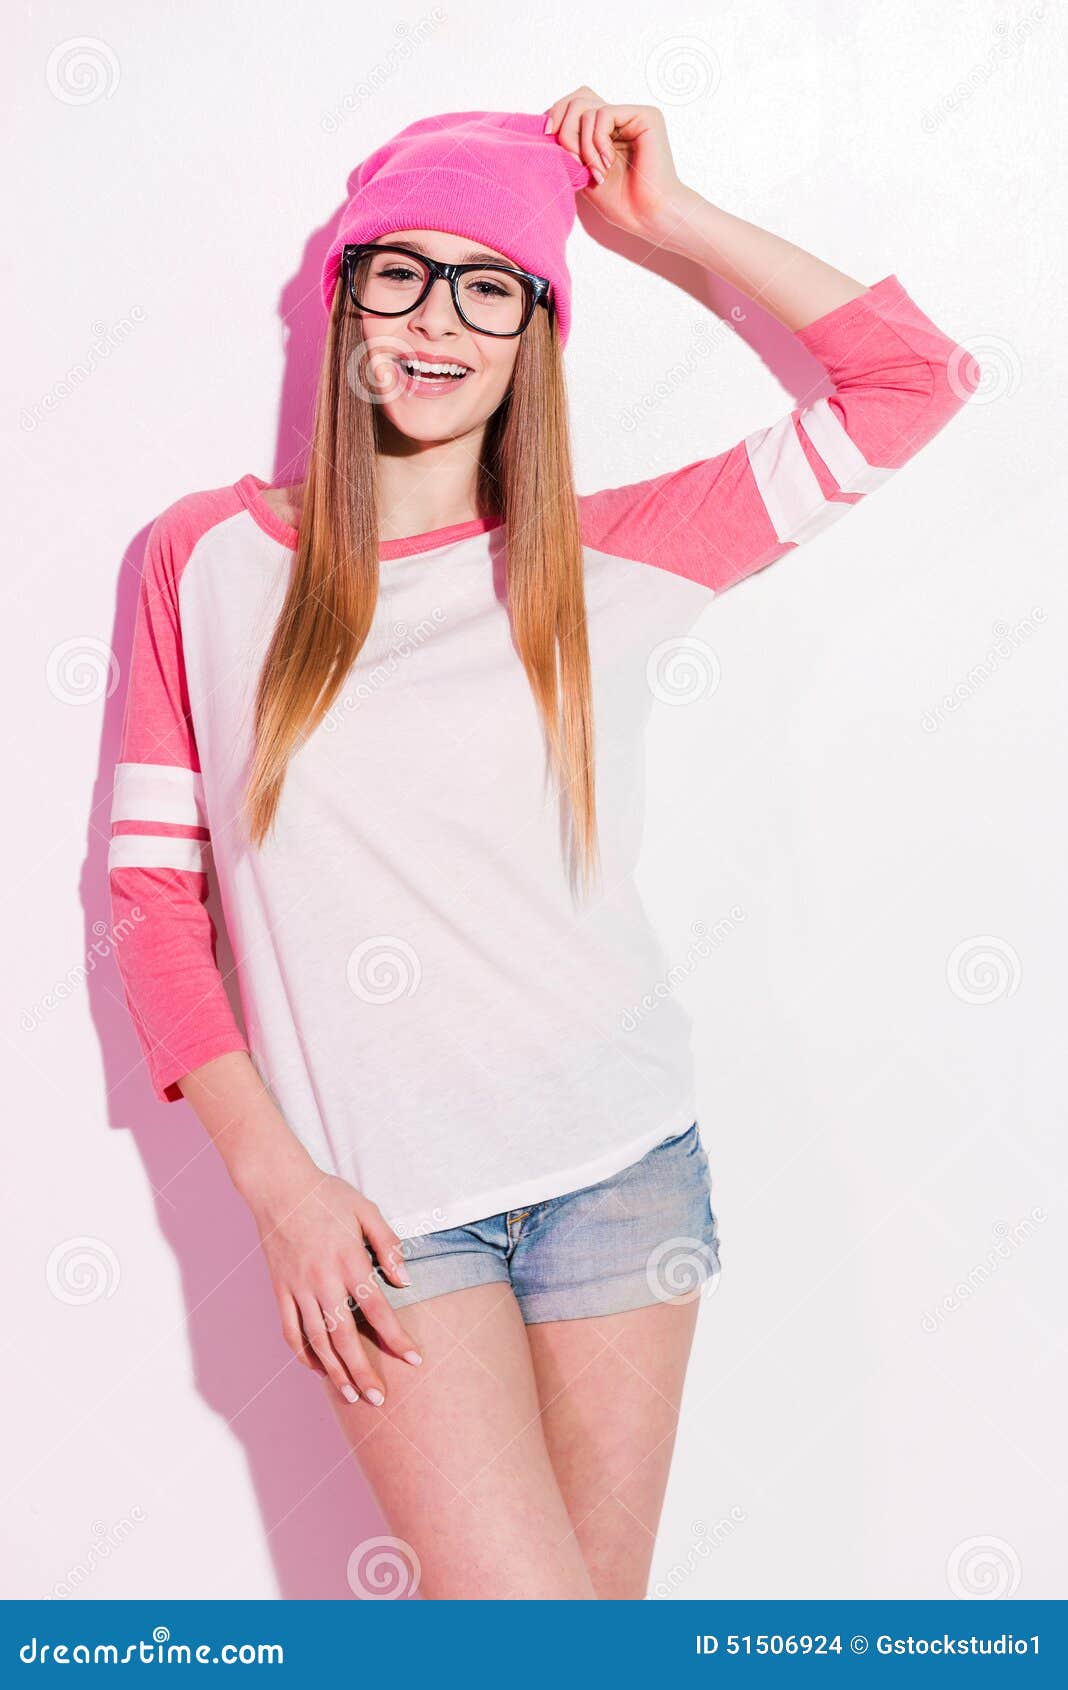 Hipster girl. stock photo. Image of funky, beauty, clothing - 51506924